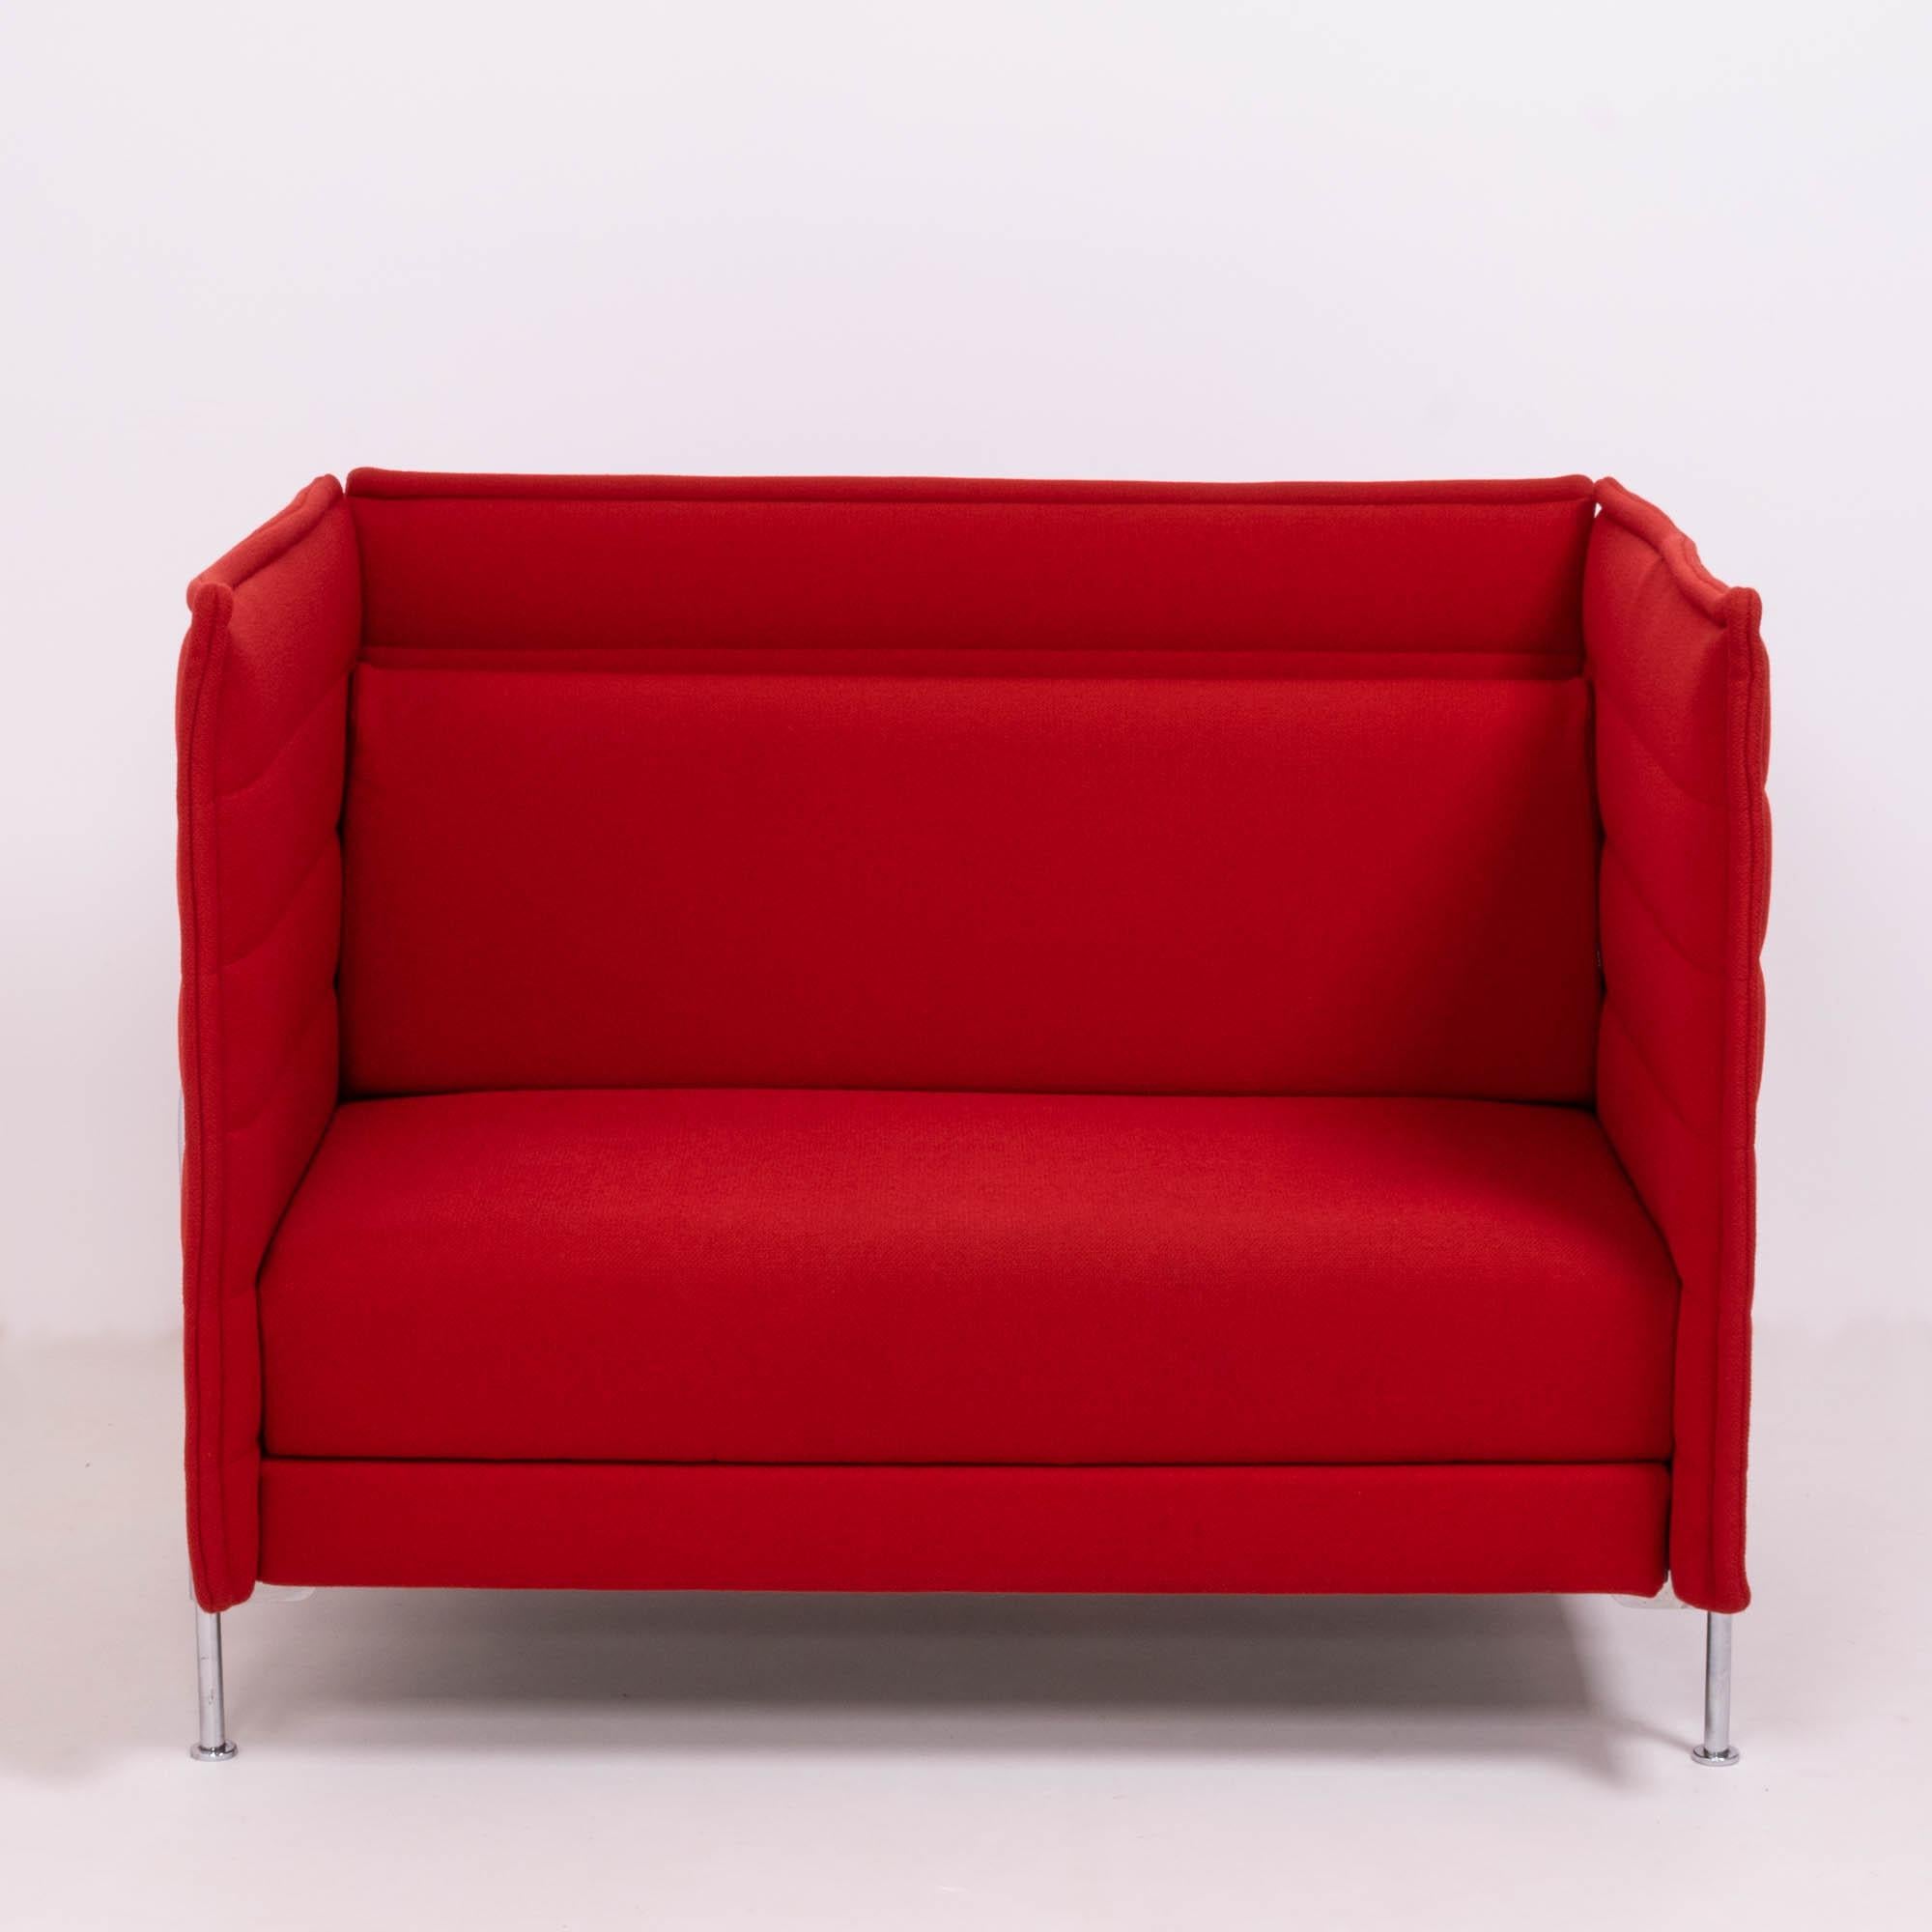 German Alcove Red Loveseat Sofa by Ronan & Erwan Bouroullec for Vitra, Set of 2